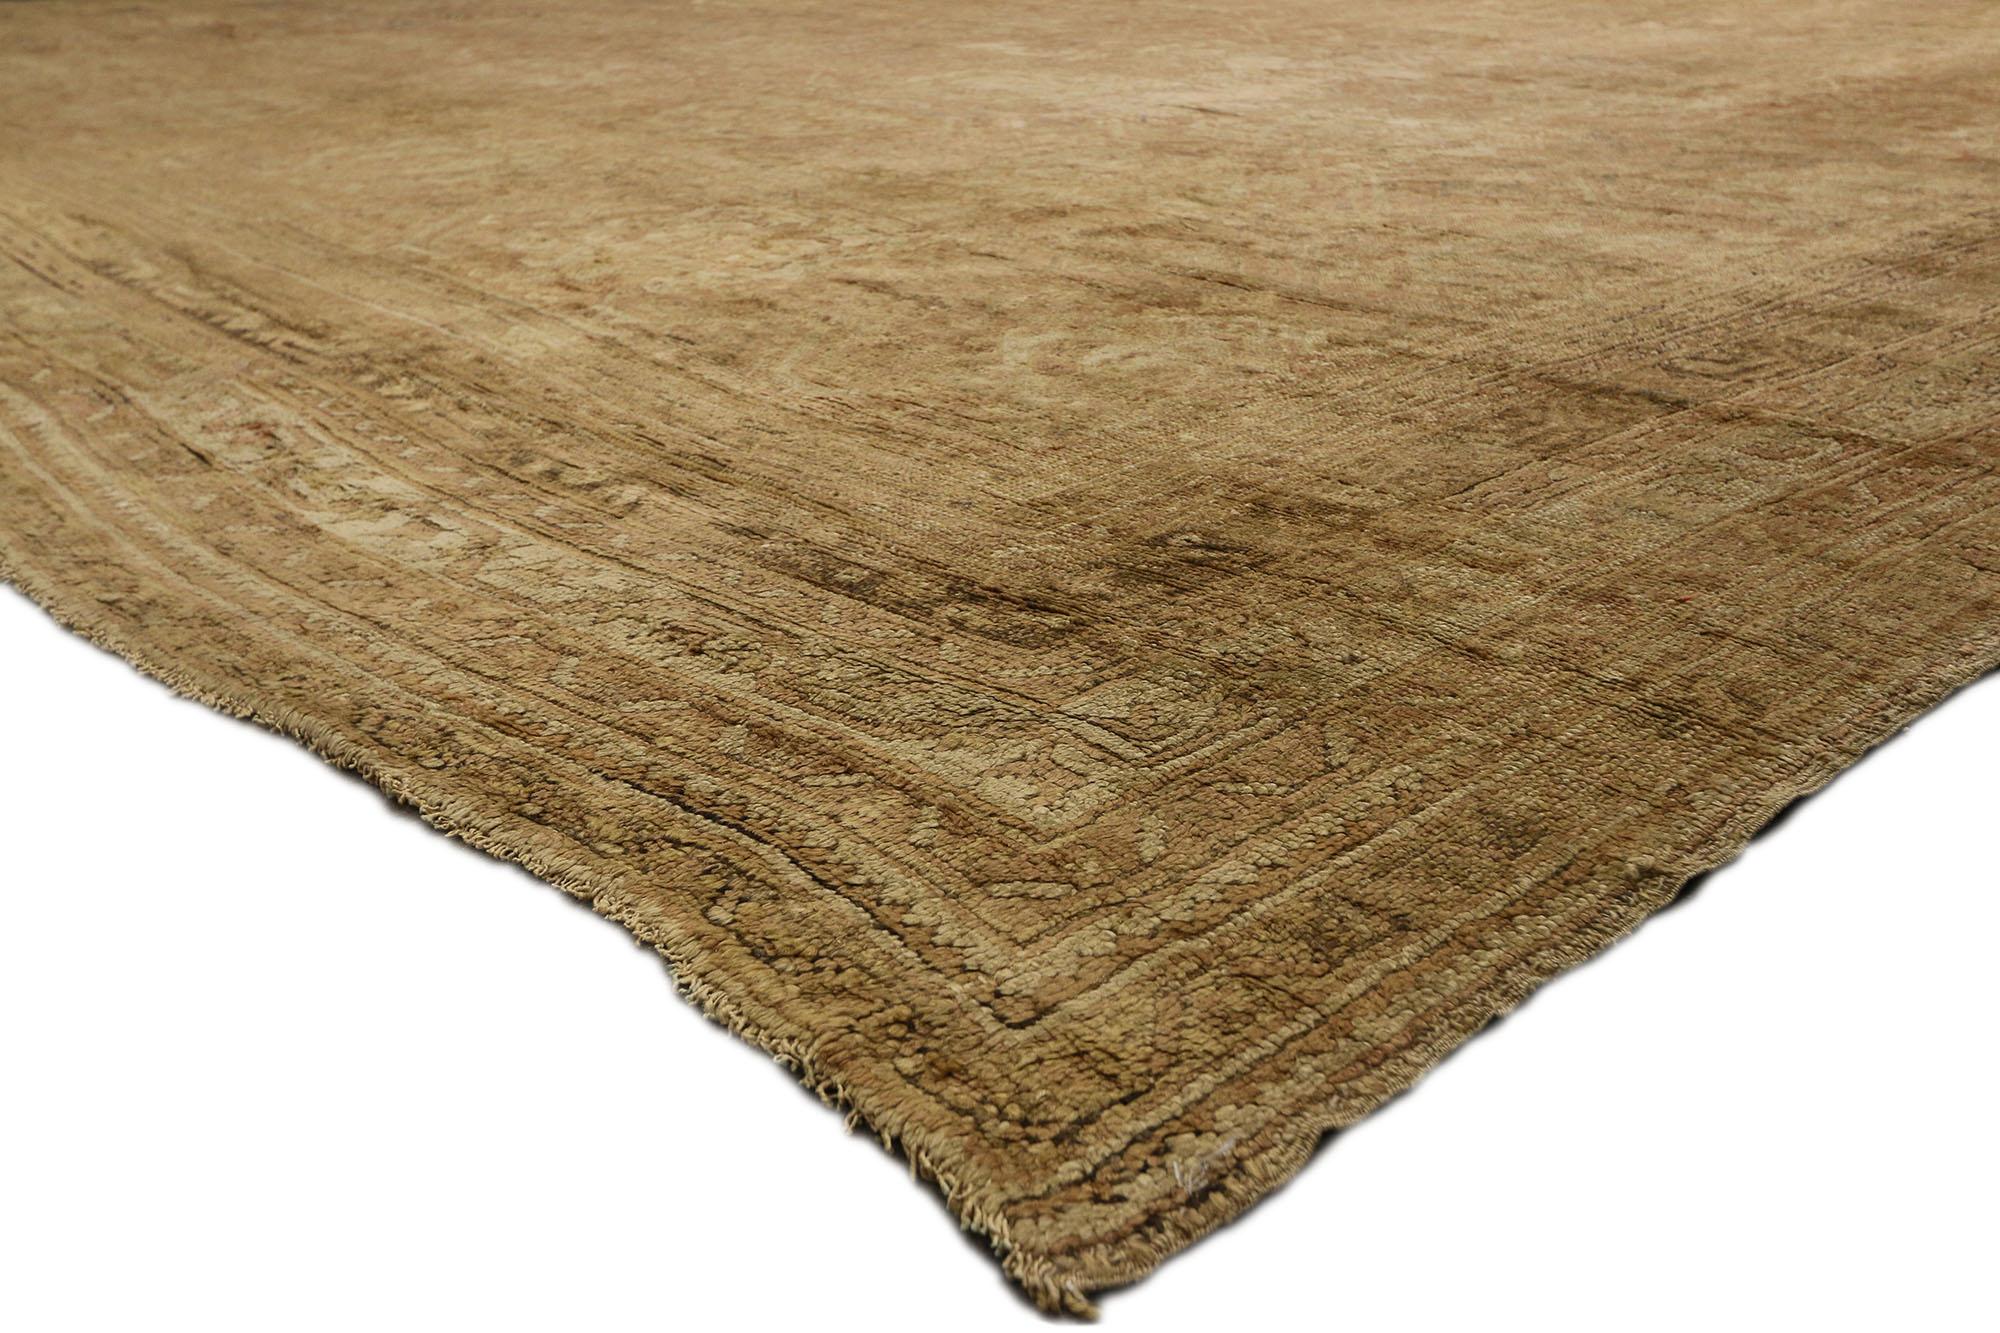 73446 Antique Turkish Oushak Palace Rug with Warm Rustic Craftsman Cottage Style. With a warm, rich color palette, rustic vibes, and subtle sophistication, this hand knotted wool antique Turkish Oushak rug embodies Craftsman style with an inviting